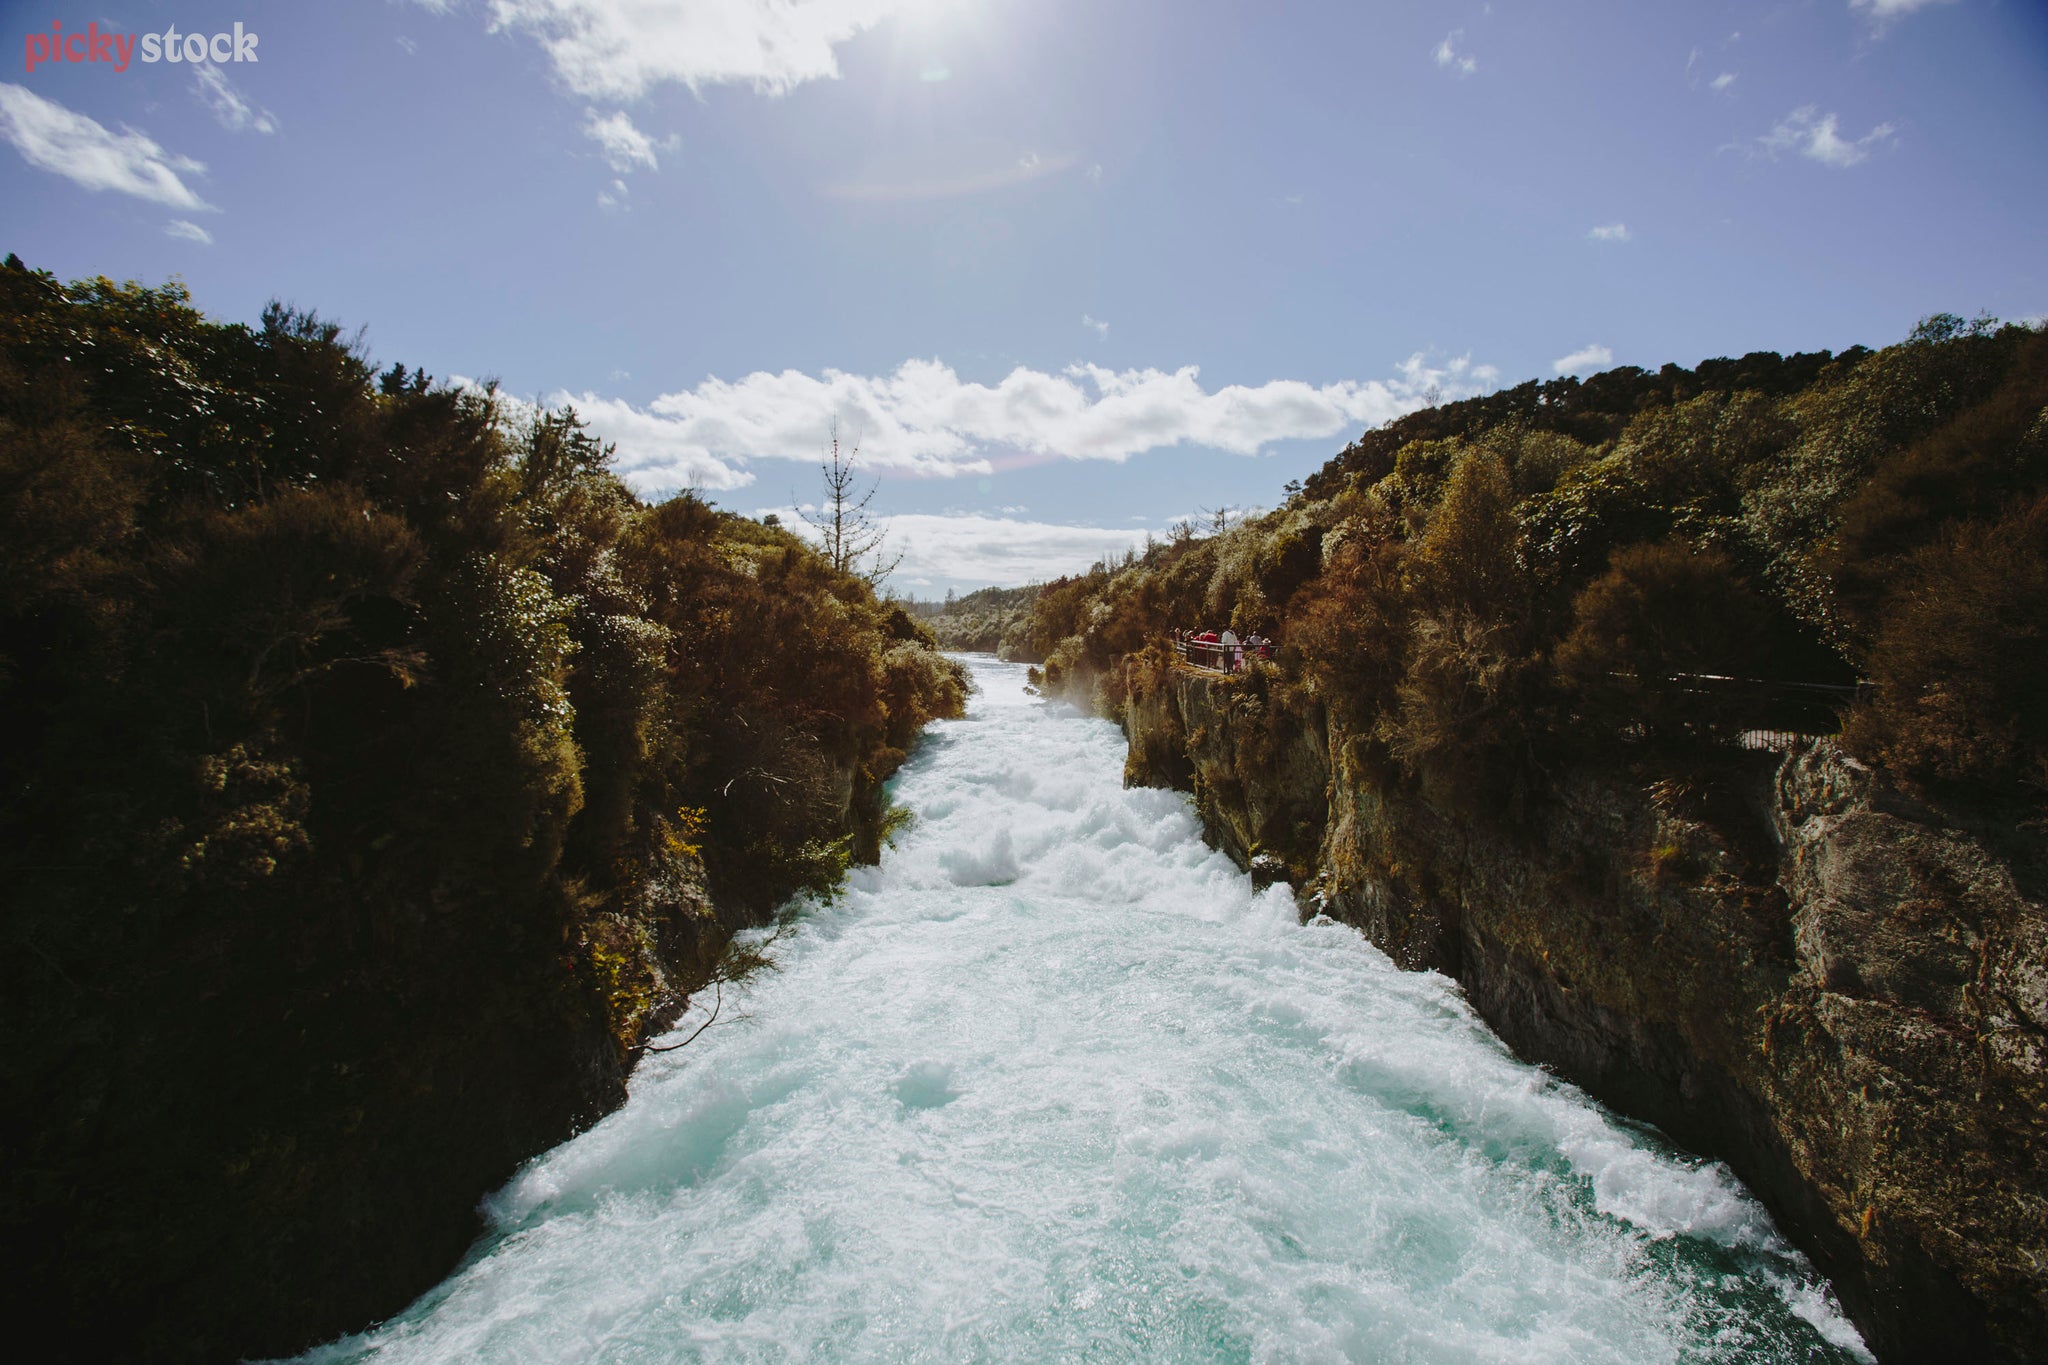 Symmetrical viewpoint from the middle of Huka Falls Bridge, the ice cold falls gushing through the middle of the image, bright blue sky above. 